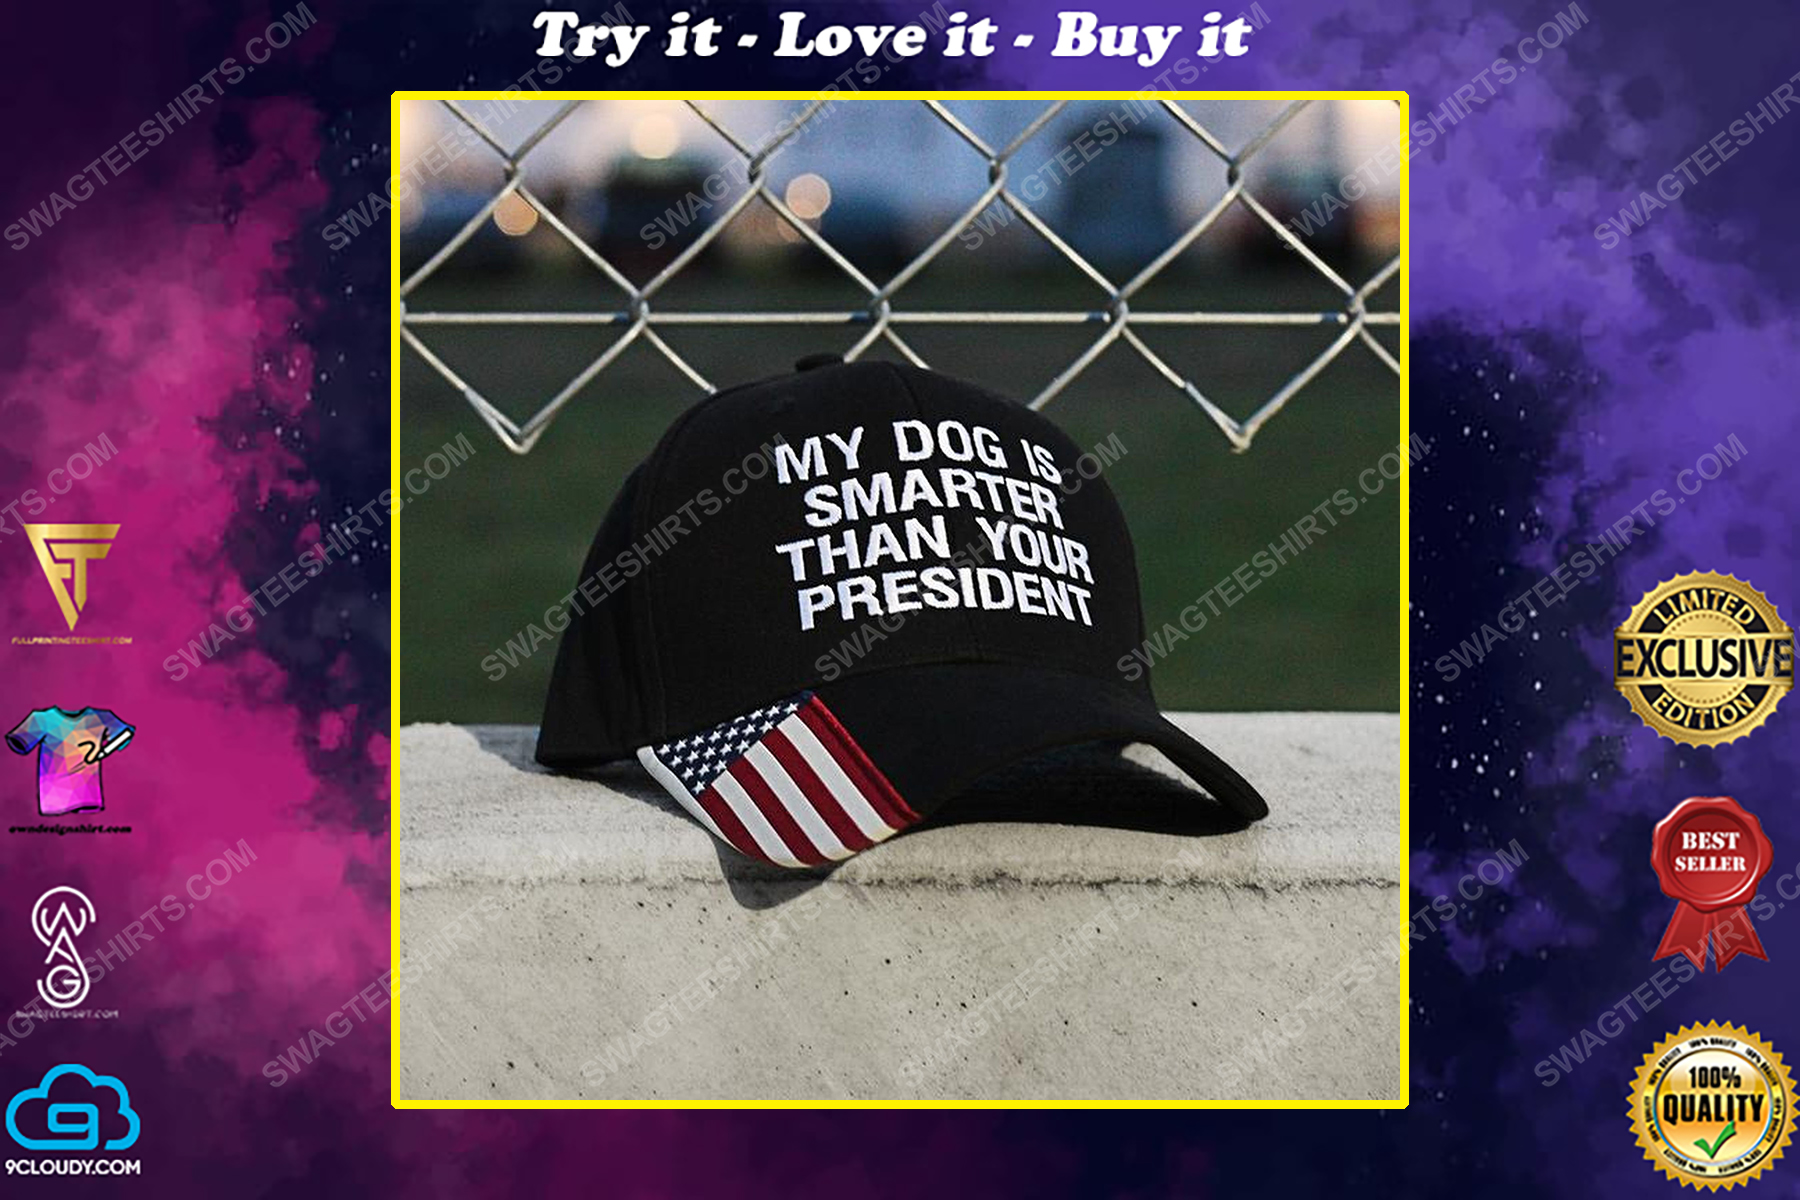 My dog is smarter than your president full print classic hat